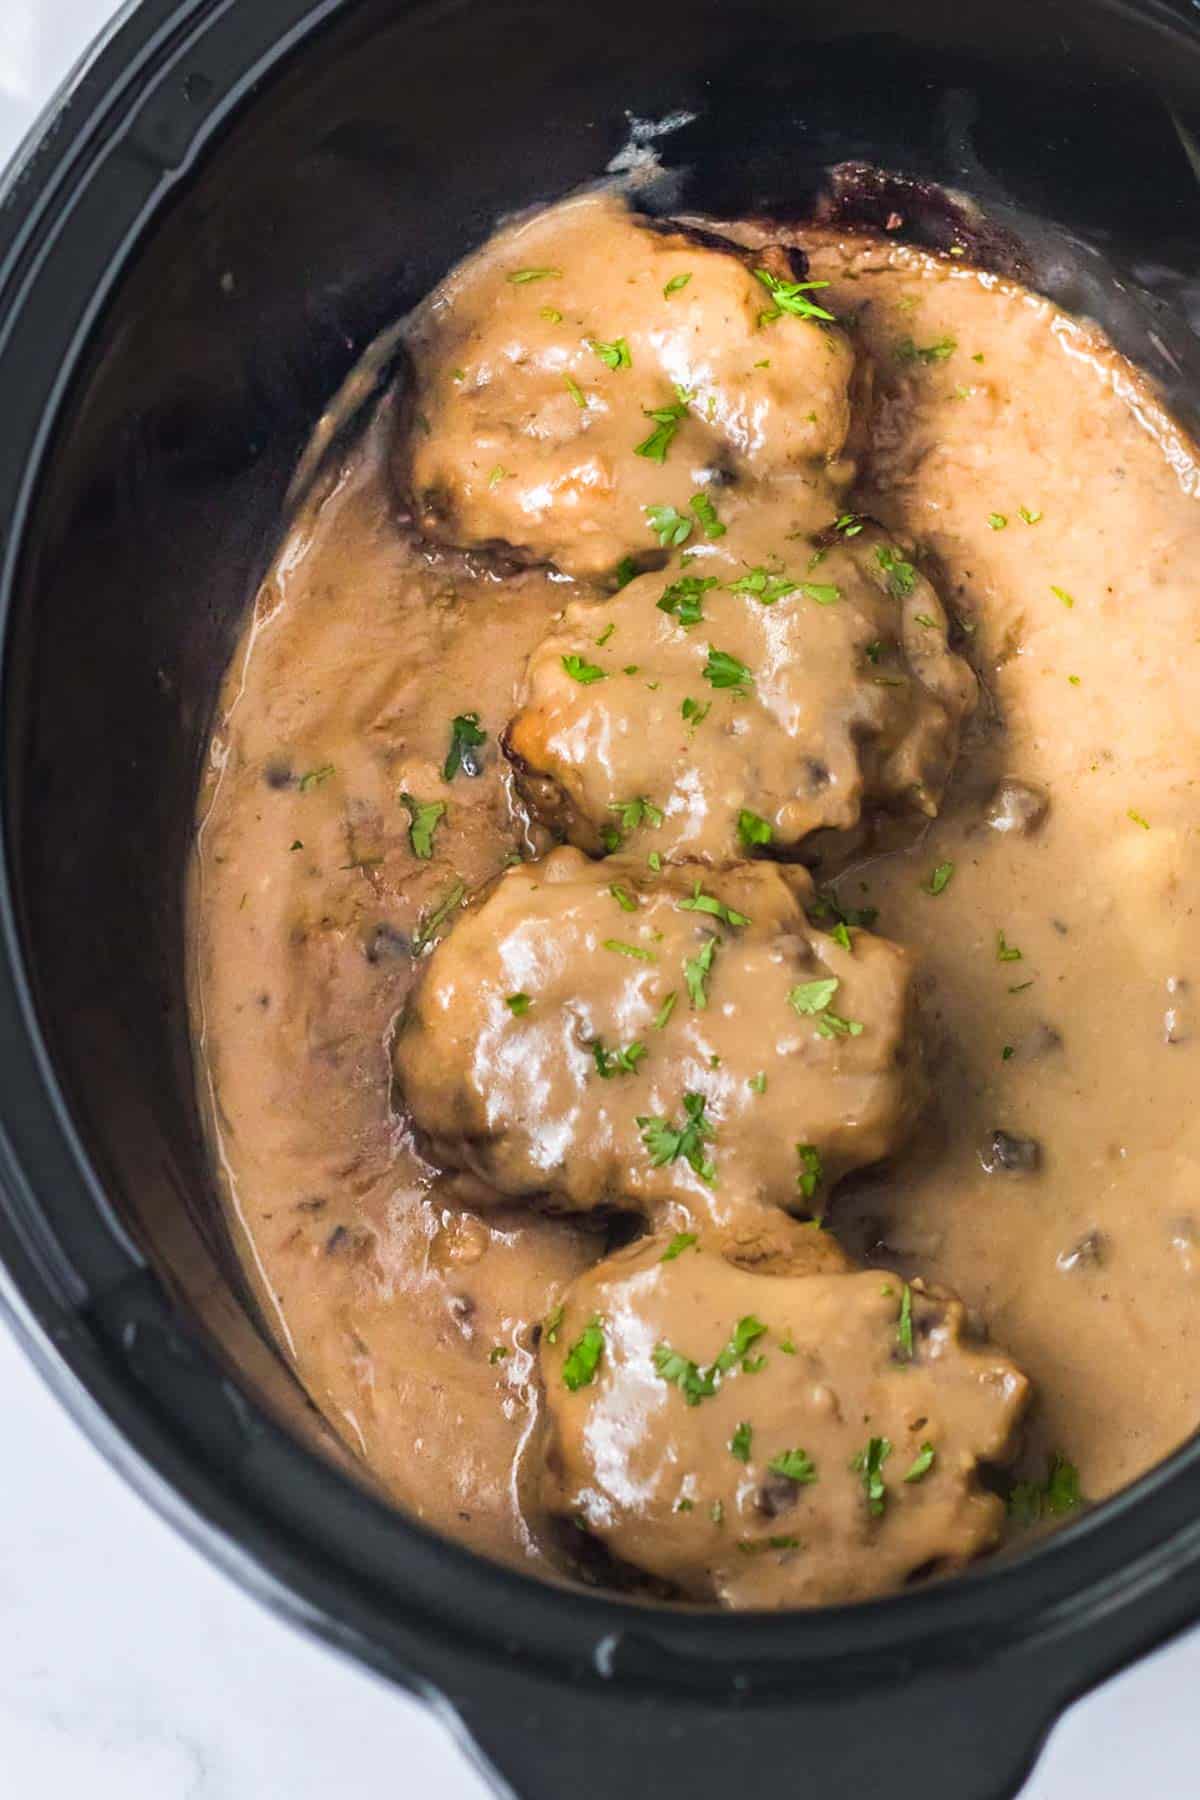 A slow cooker filled with smothered meatballs and gravy.